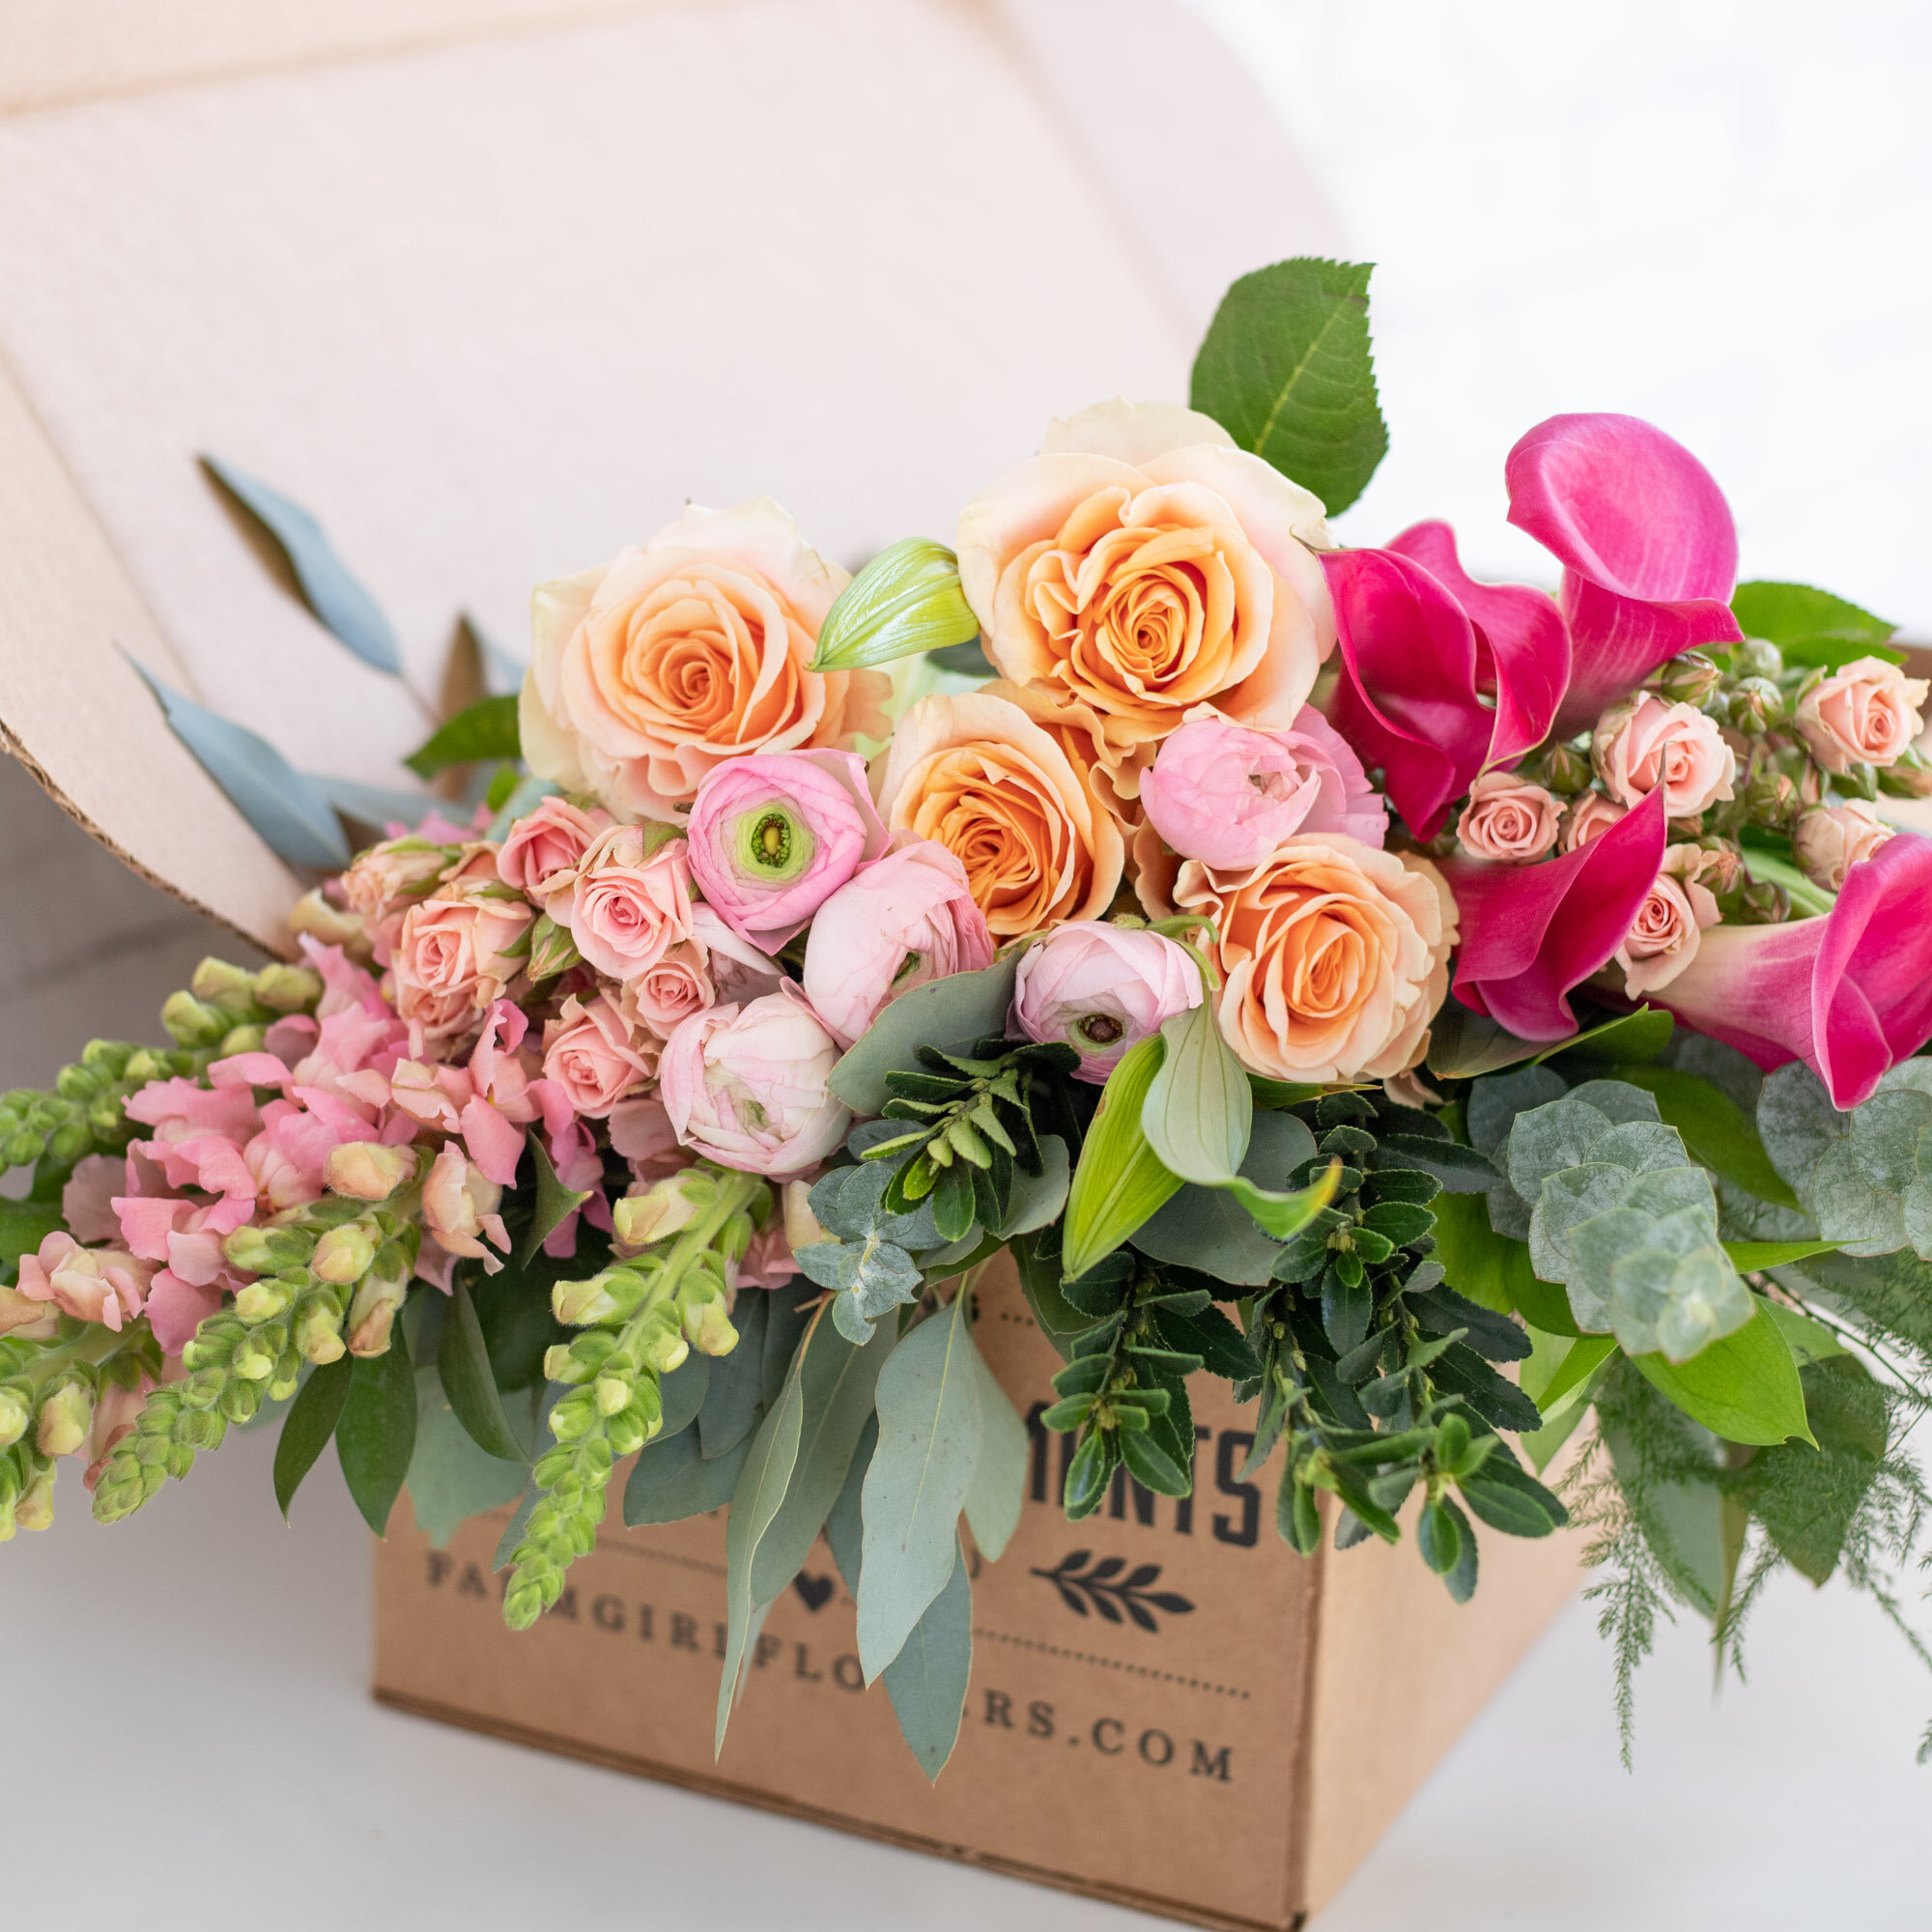 A bouquet of mixed white, pink, and peach flowers wrapped in burlap, sitting in a cardboard box